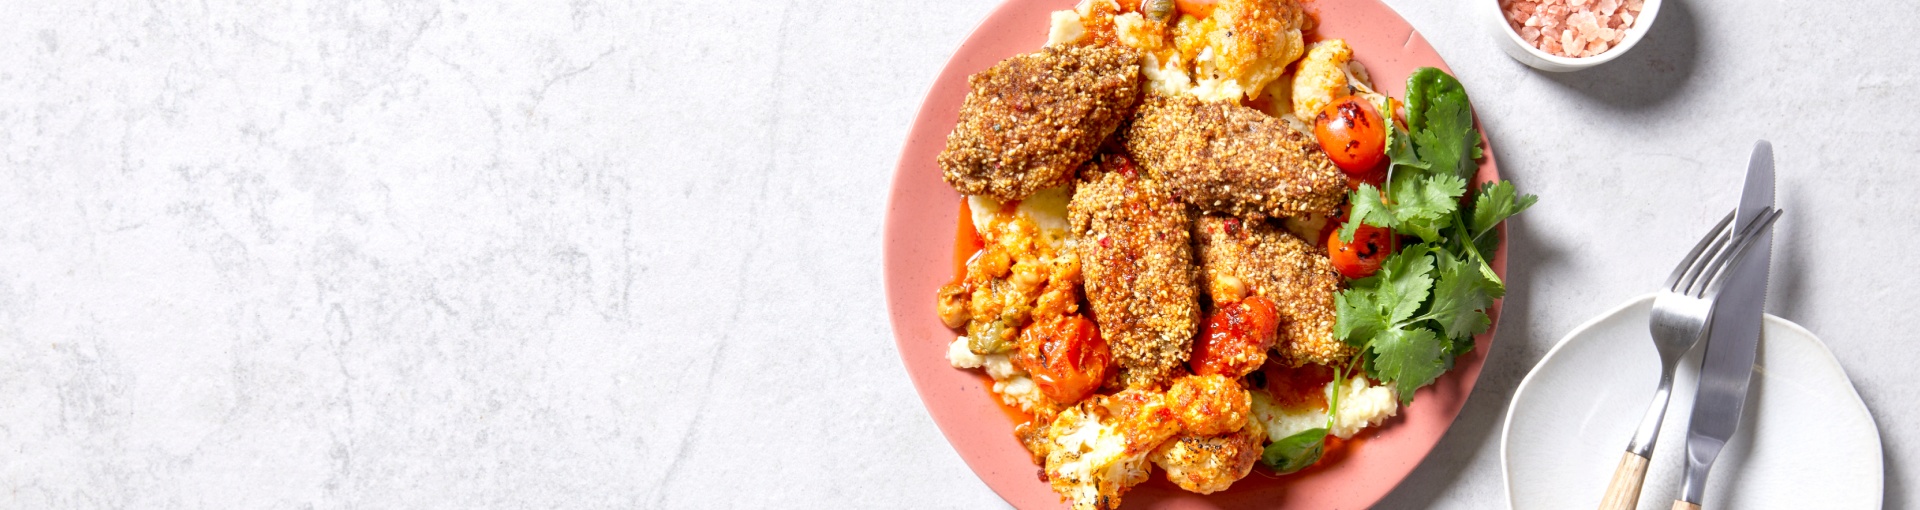 Couscous Crusted Chicken-style Pieces